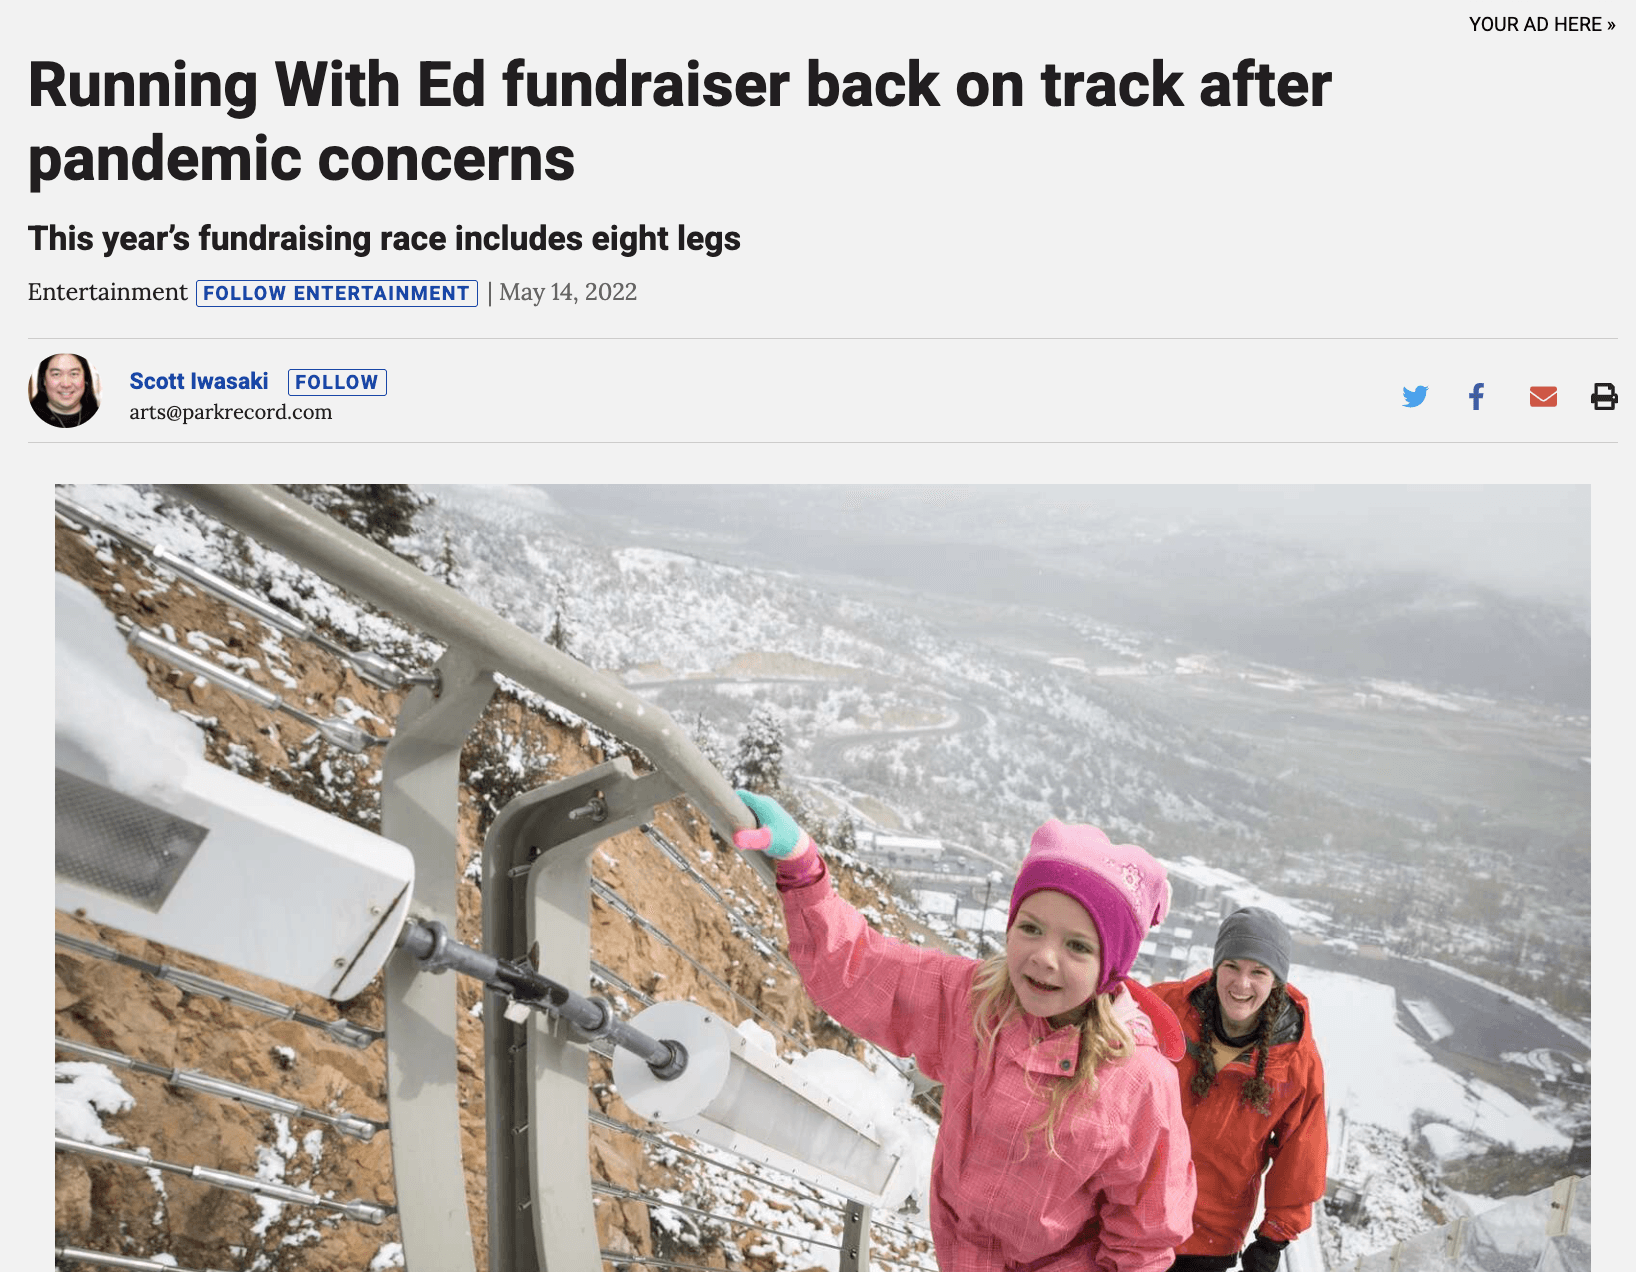 Running With Ed fundraiser back on track after pandemic concerns